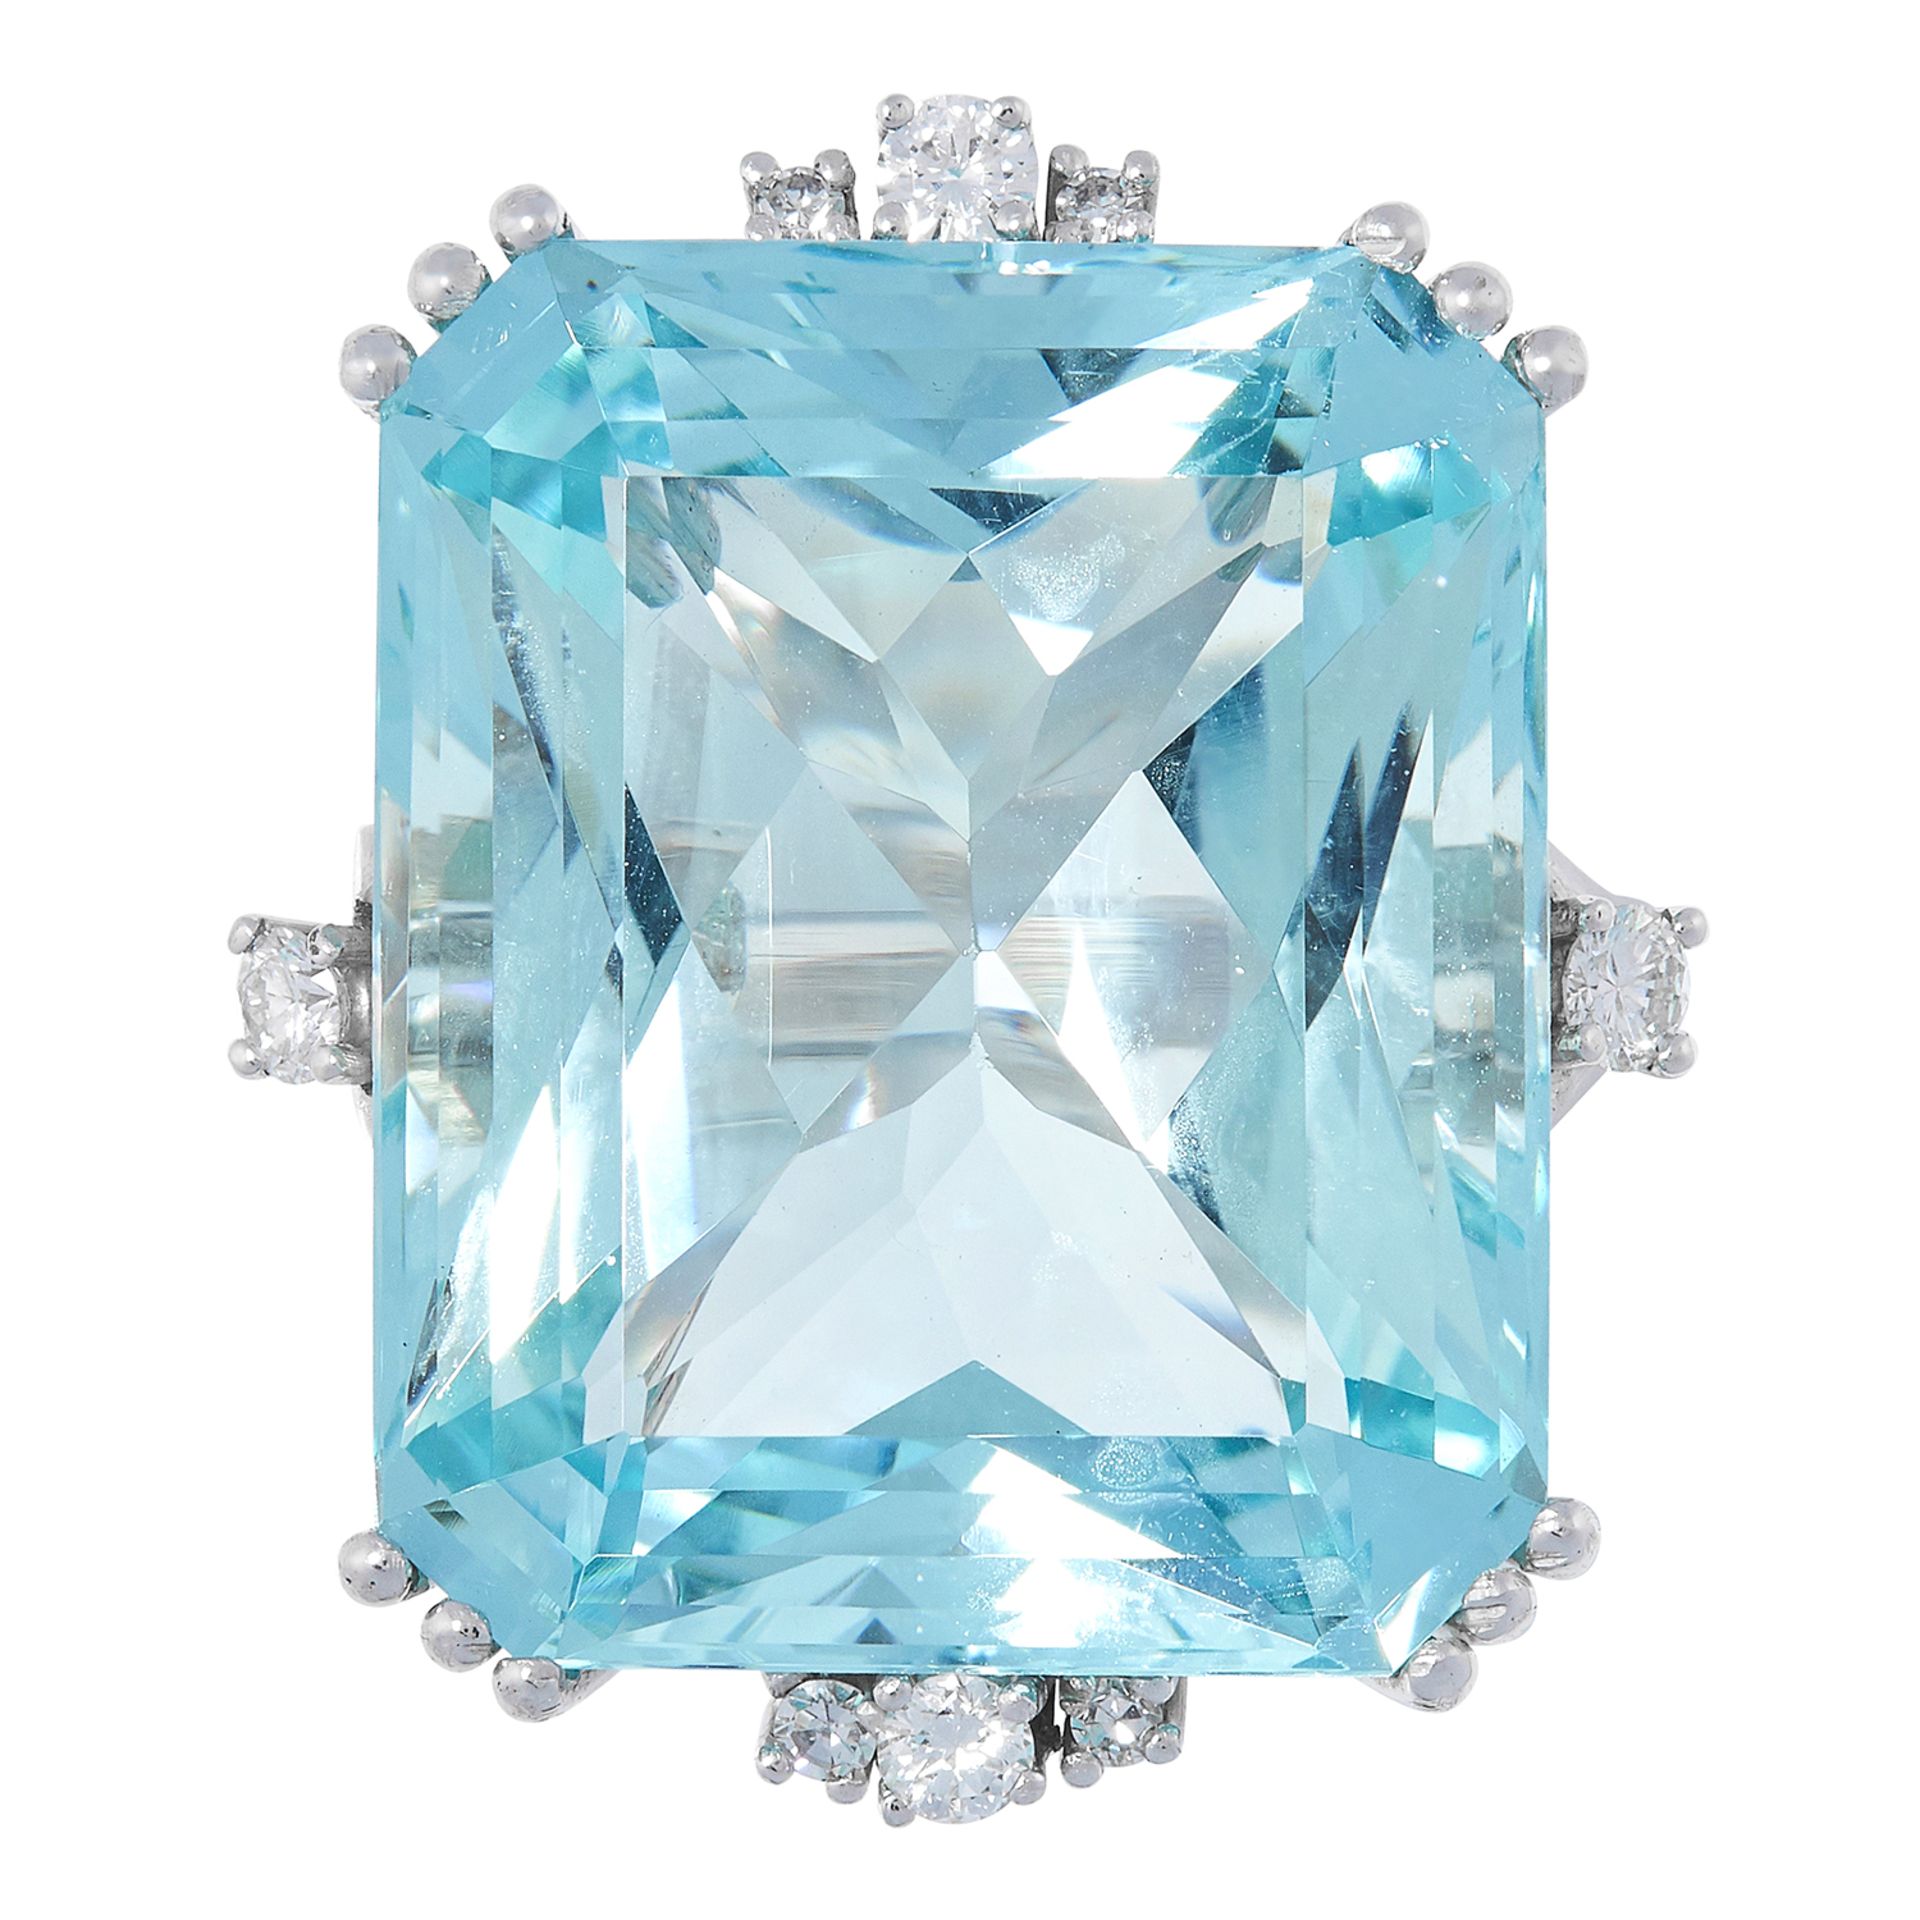 AQUAMARINE AND DIAMOND RING set with an emerald cut aquamarine of approximately 26.00 carats and